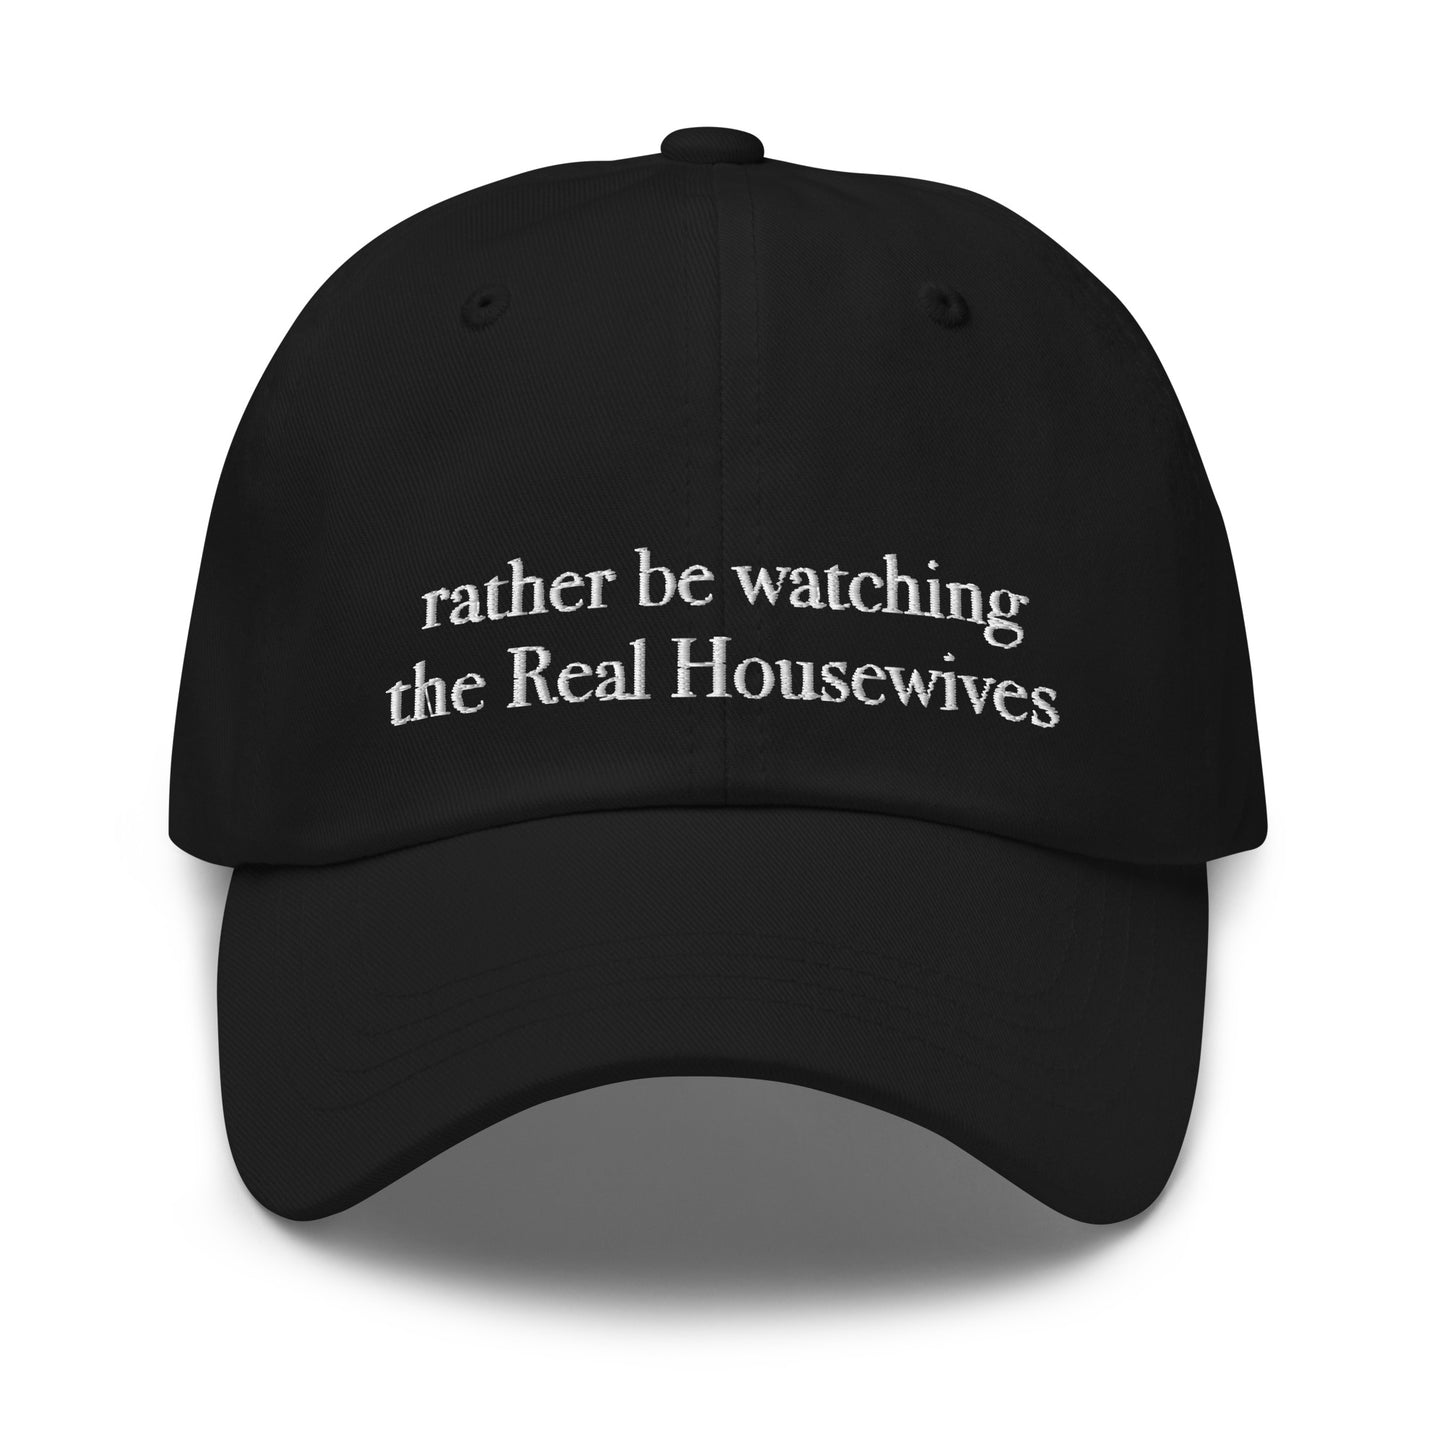 Rather be Watching the Real Housewives - Dad Hat